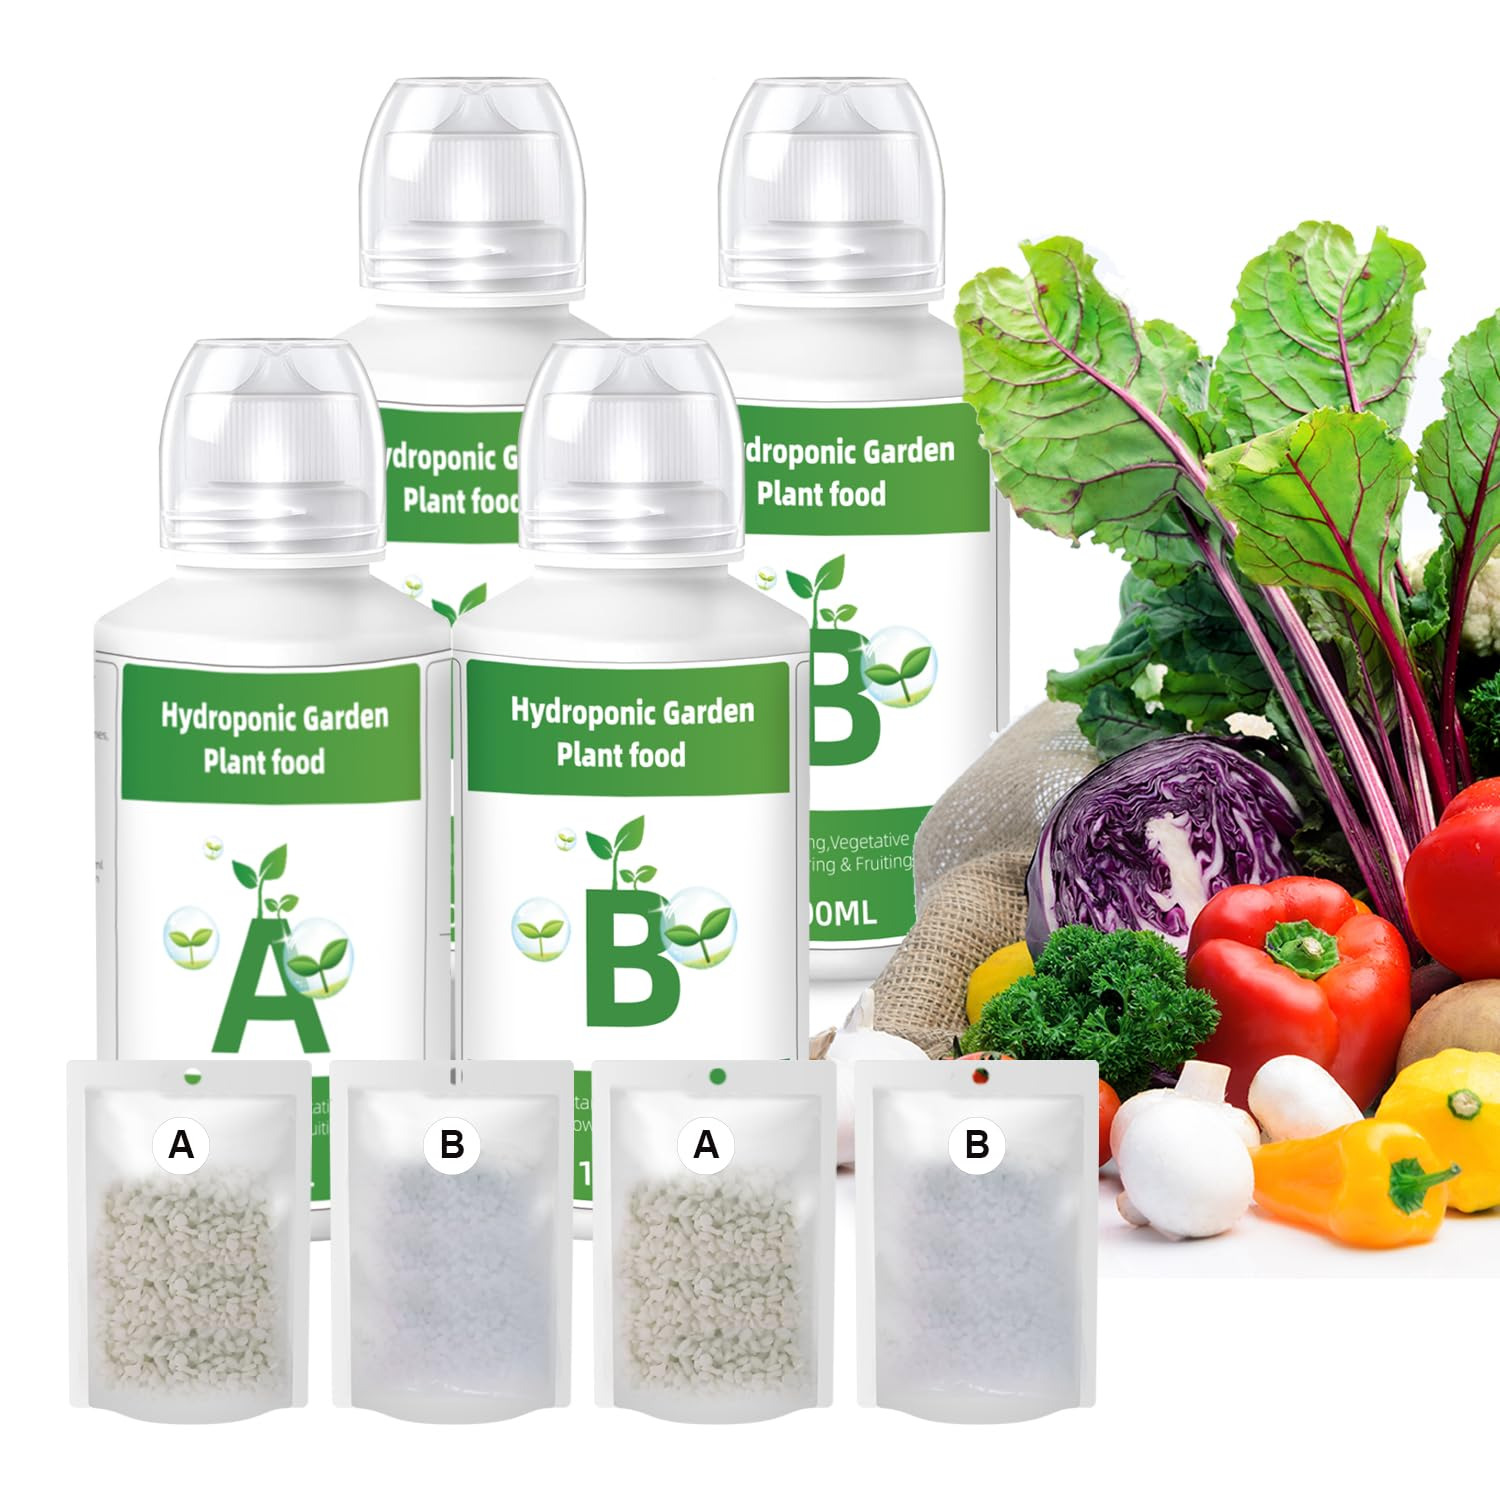 800Ml Hydroponic Nutrients Plant Food for Hydroponics Plant Food a B Hydroponics